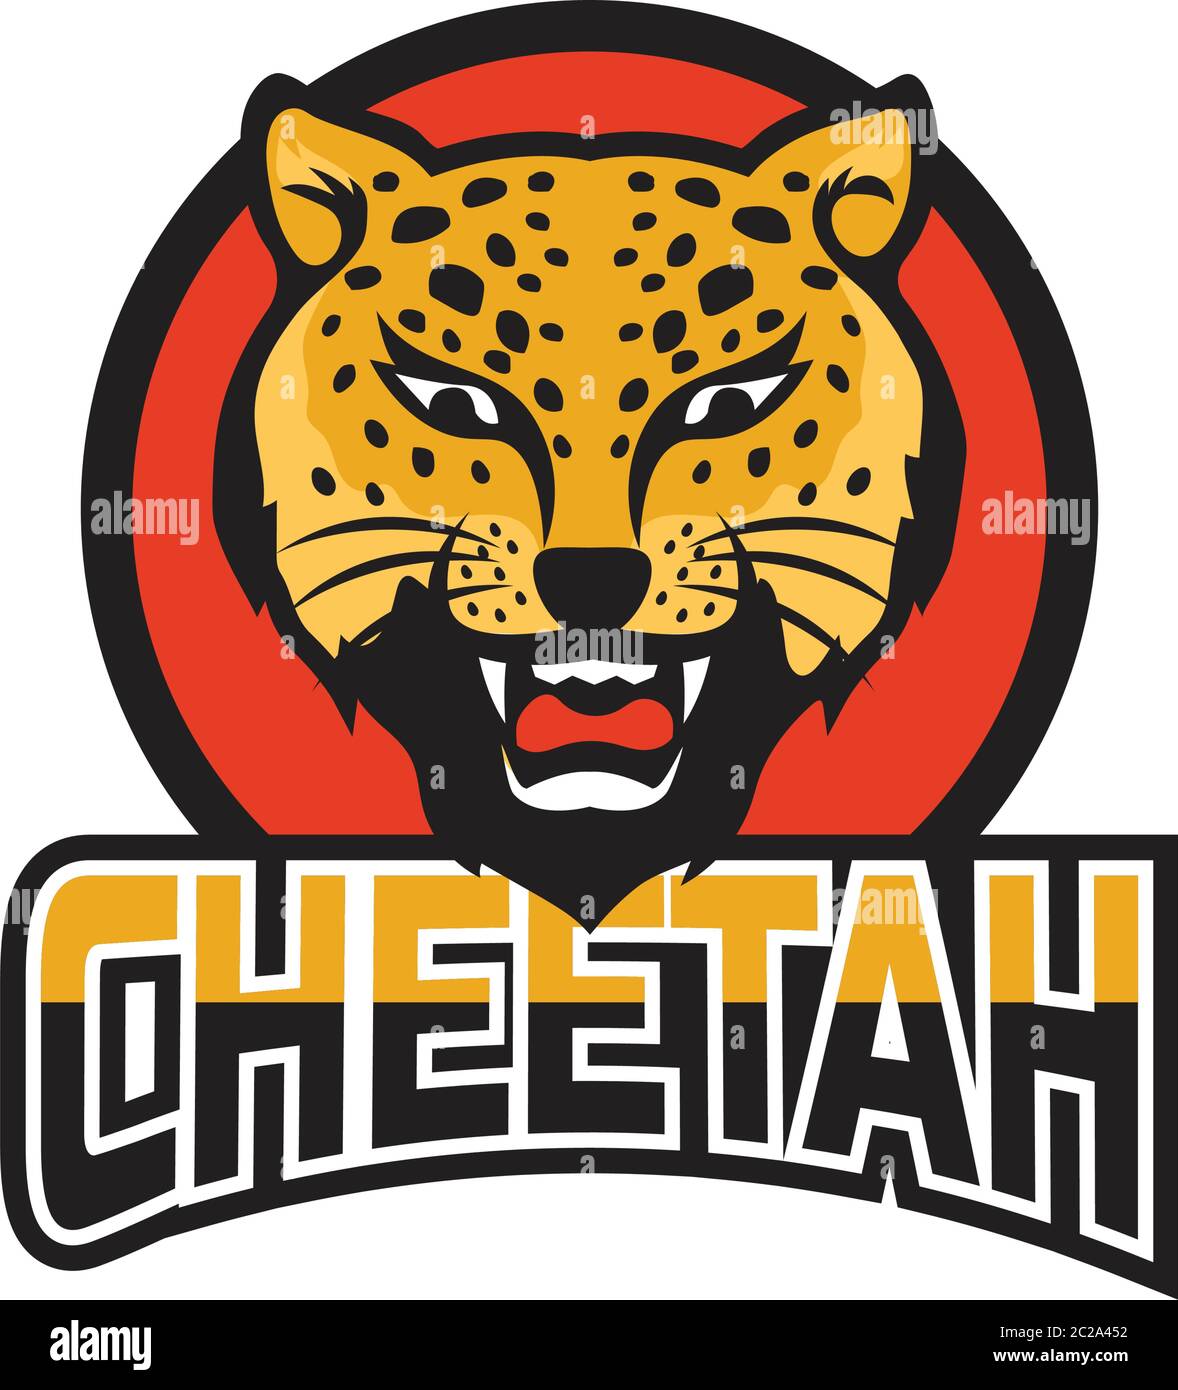 cheetah logo design vector. with the style of technology. Stock Vector